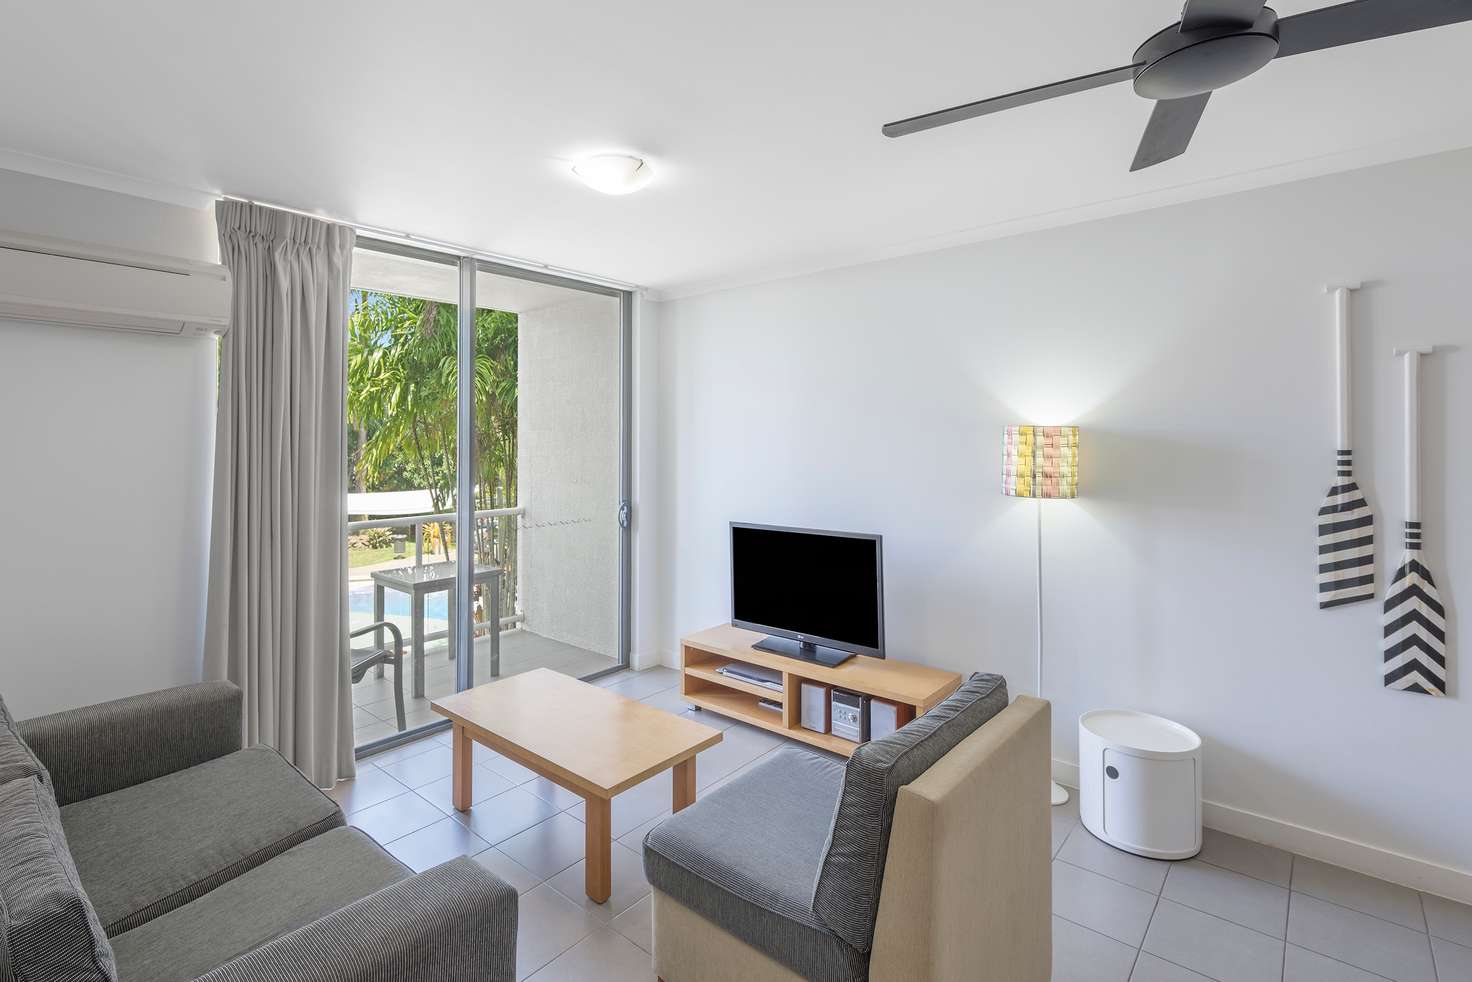 Main view of Homely apartment listing, 1 Bedroom/87-109 Port Douglas Rd., Port Douglas QLD 4877